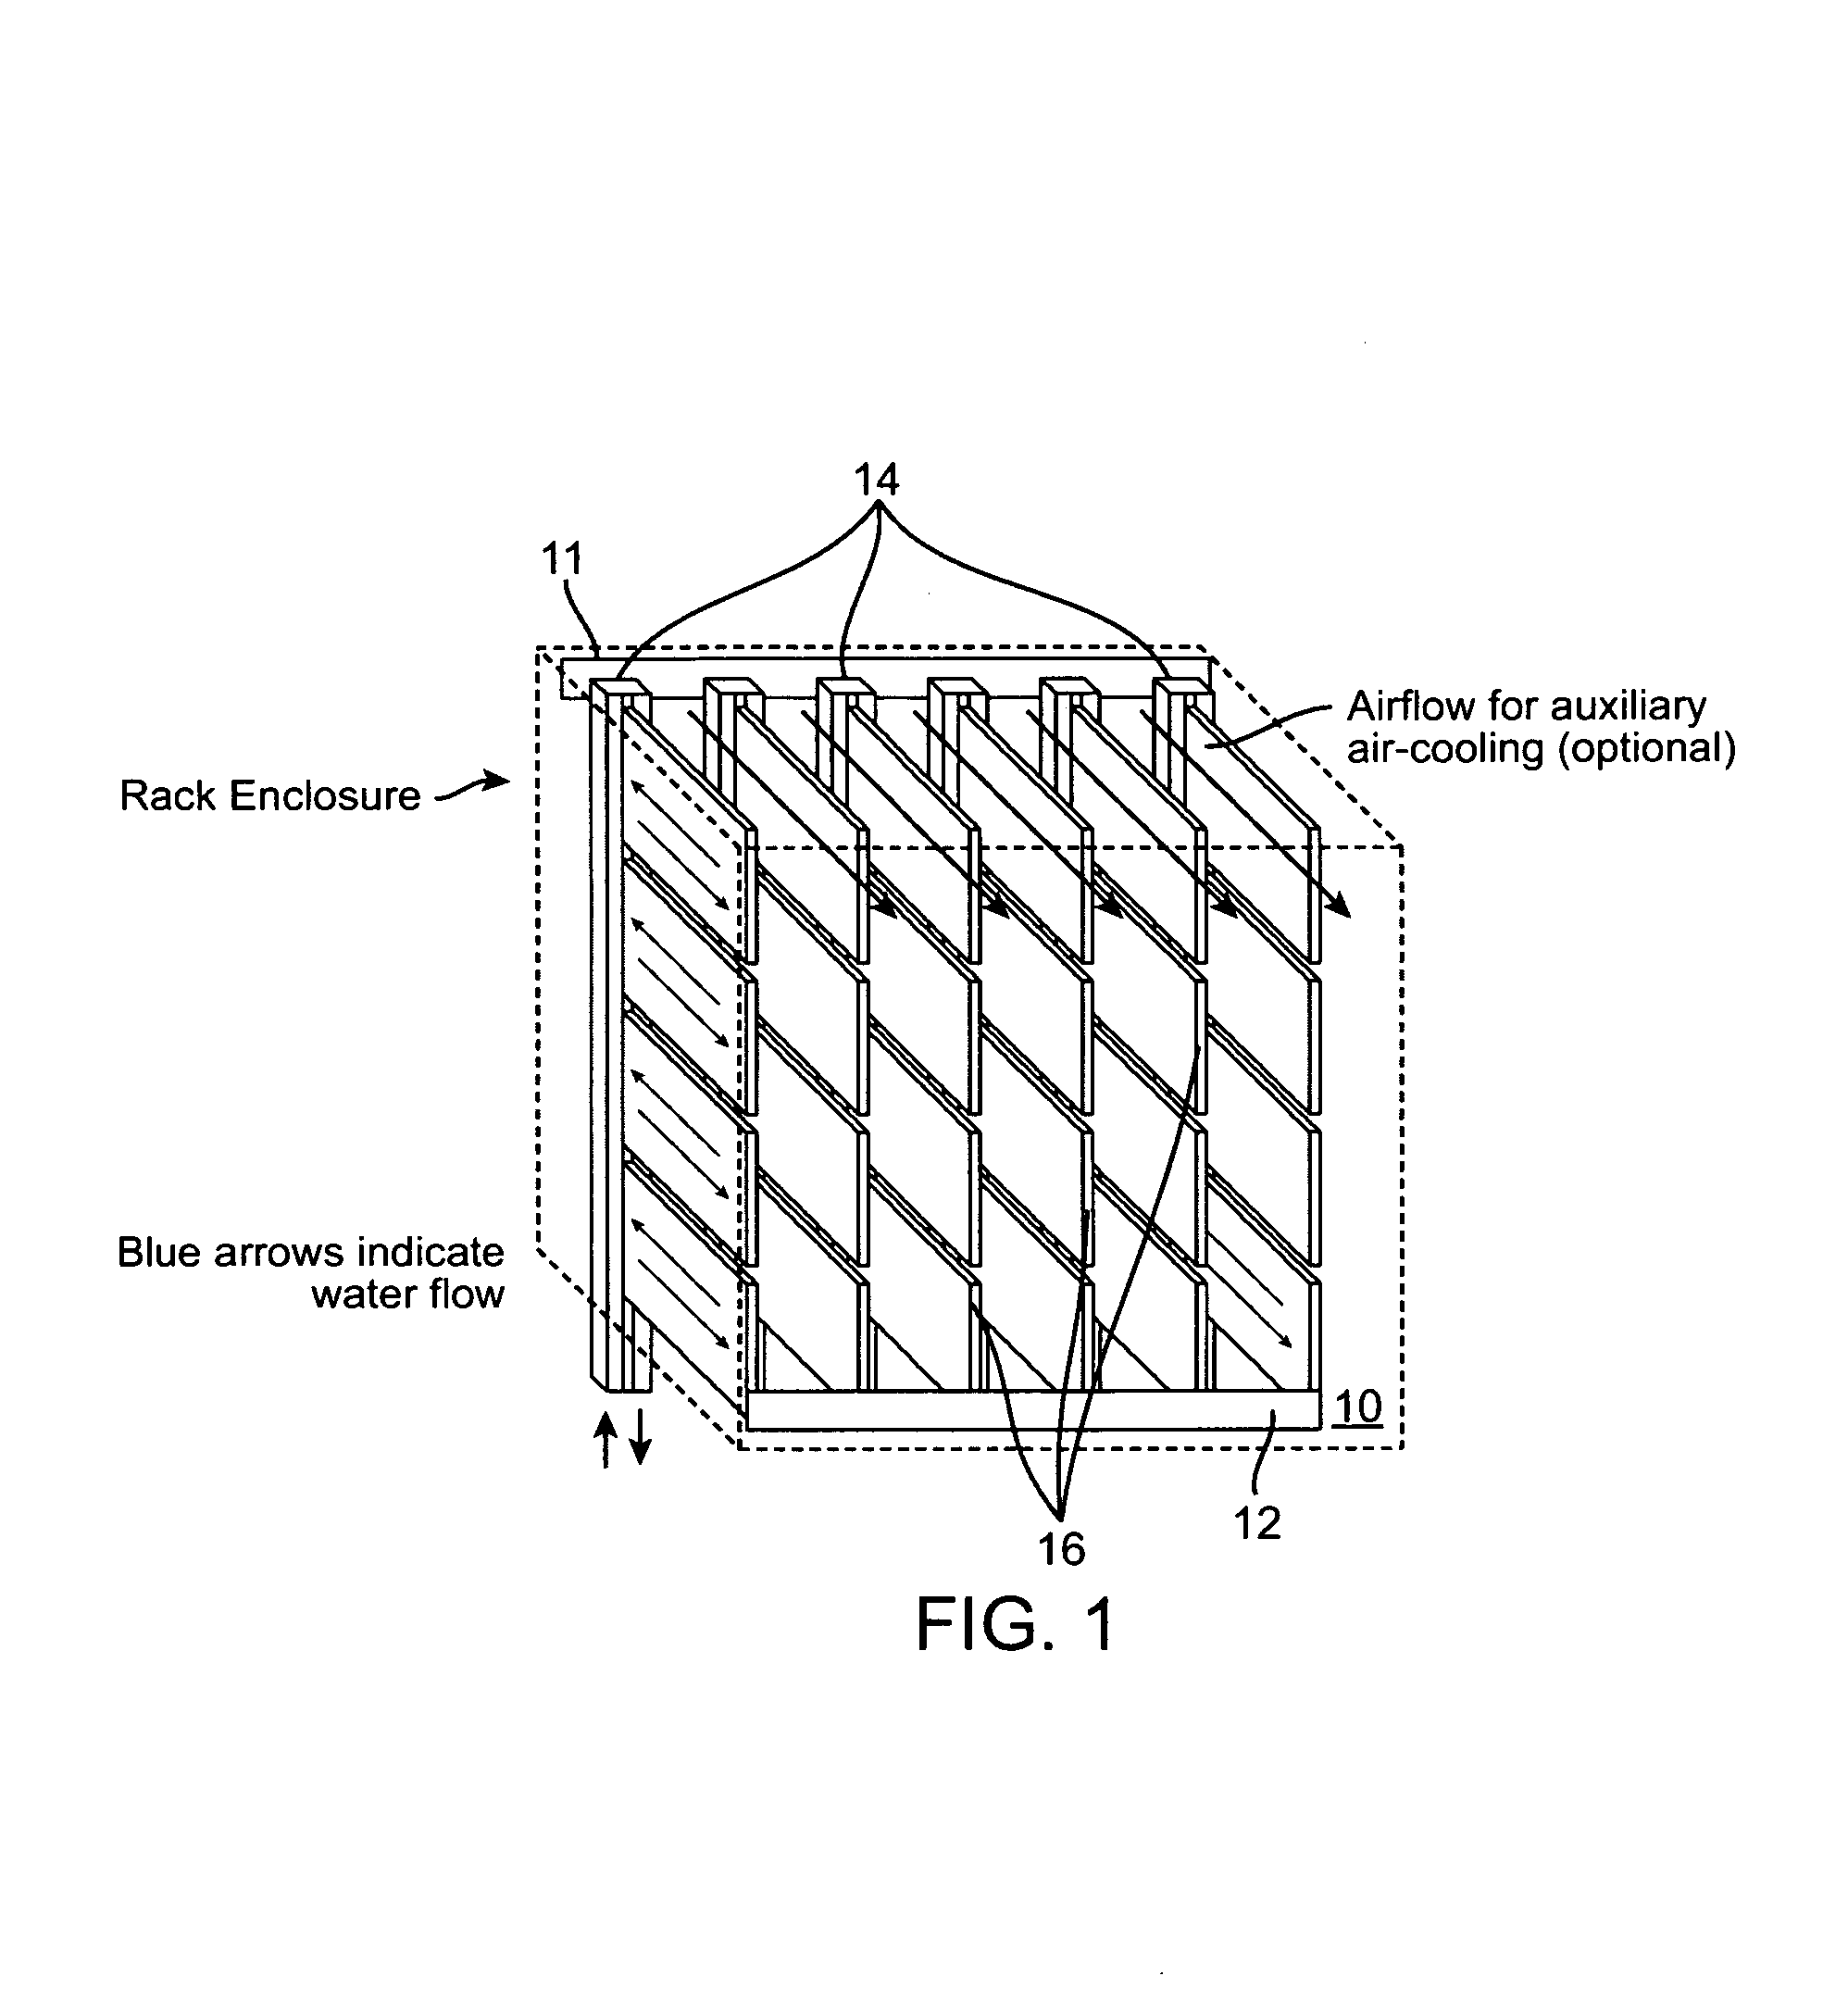 Method for high-density packaging and cooling of high-powered compute and storage server blades